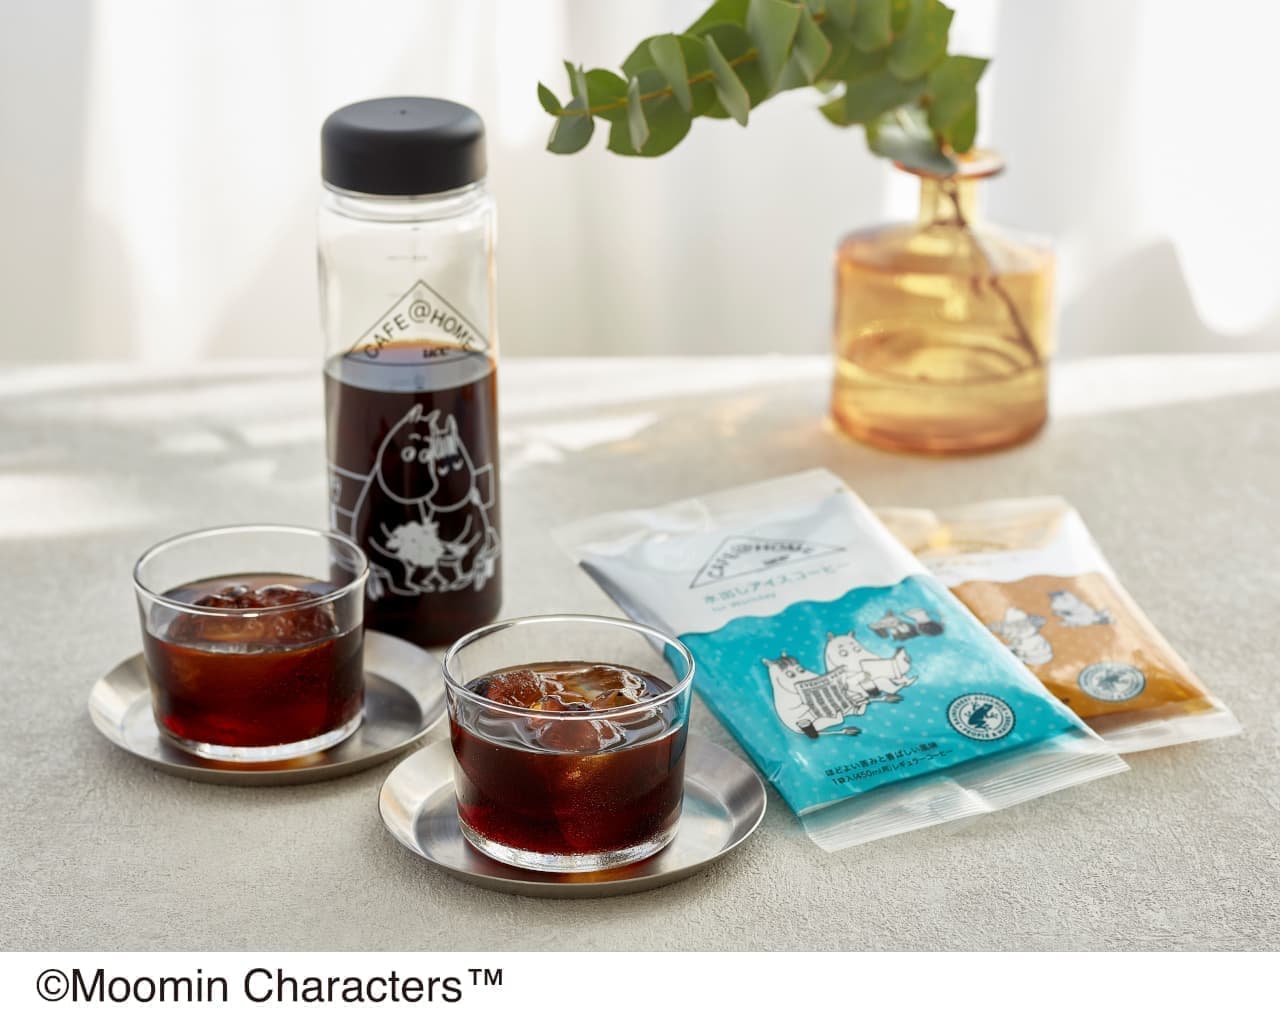 COFFEE STYLE UCC "CAFE@HOME Moomin Valley Water-drawn Iced Coffee".